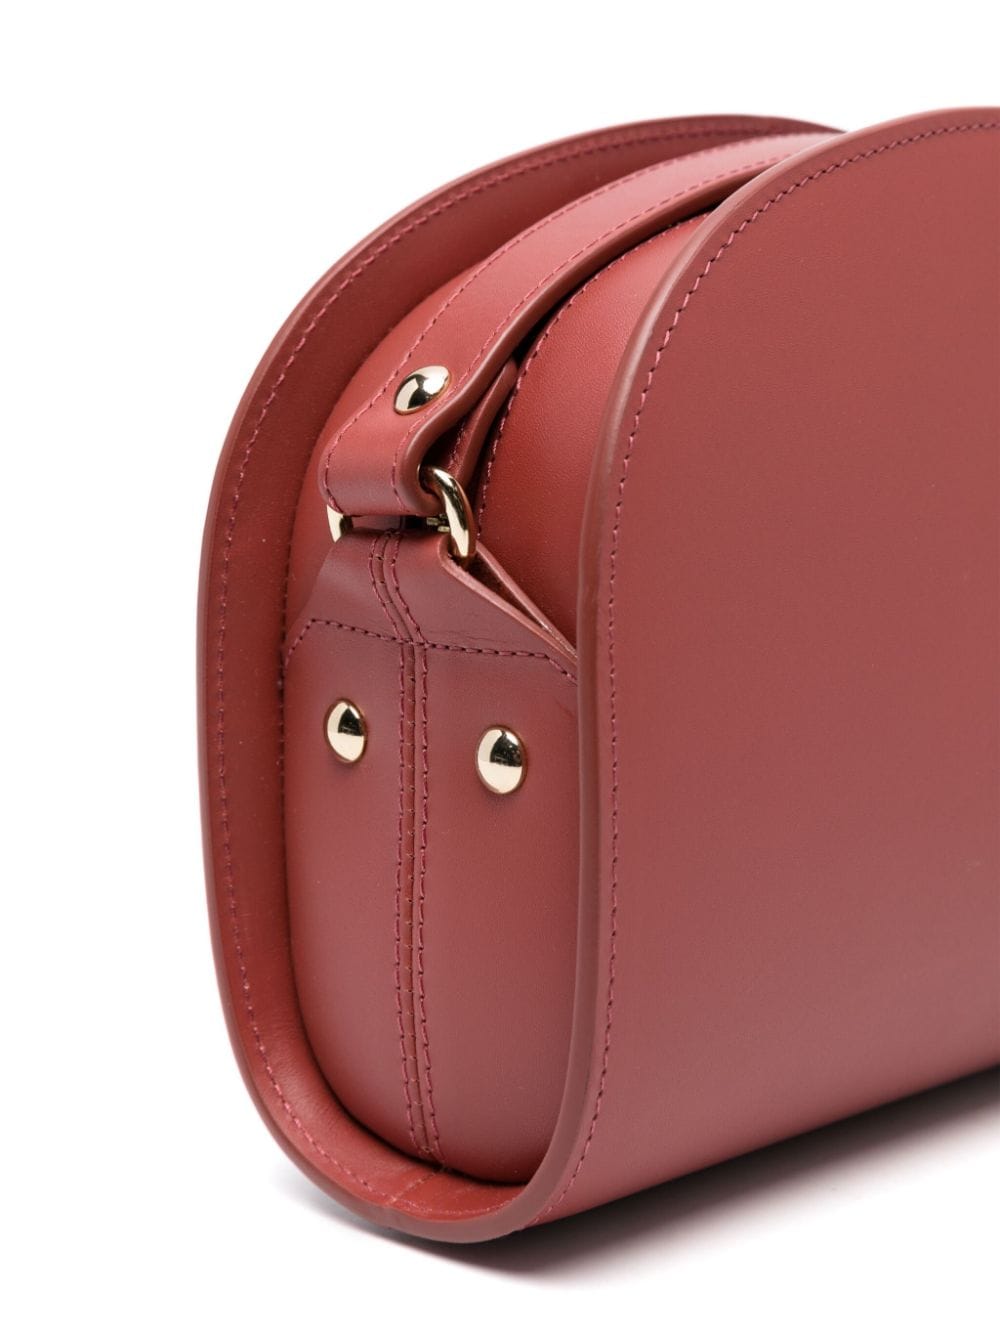 Red Valentino Shoulder Bag To The Moon And Red In Fuchsia